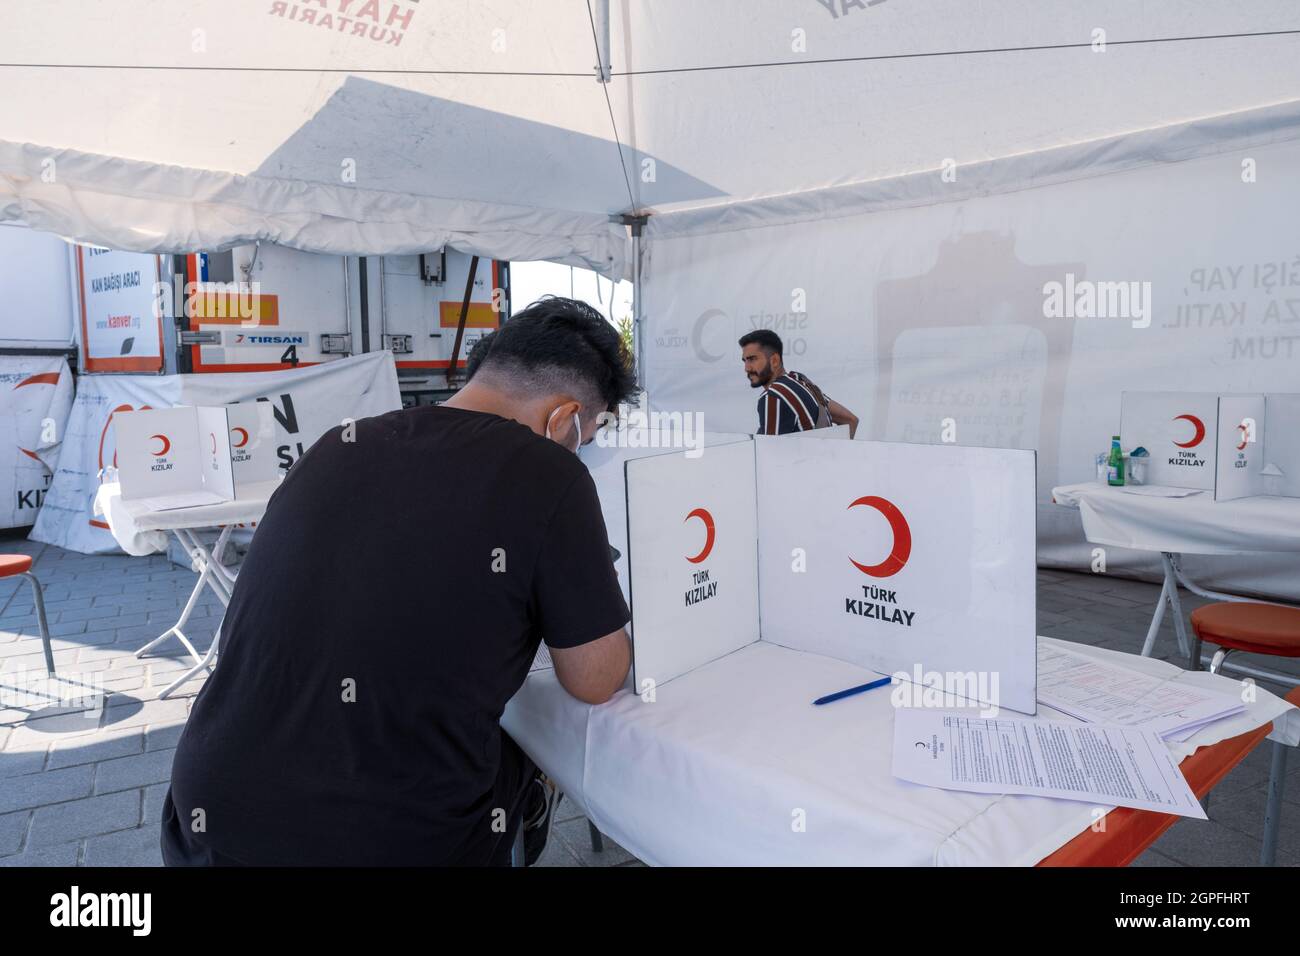 Eminonu, Istanbul, Turkey - 07.05.2021: a male person volunteer signing approval document for blood donation for Turkish Red Crescent (Turk Kizilay) u Stock Photo